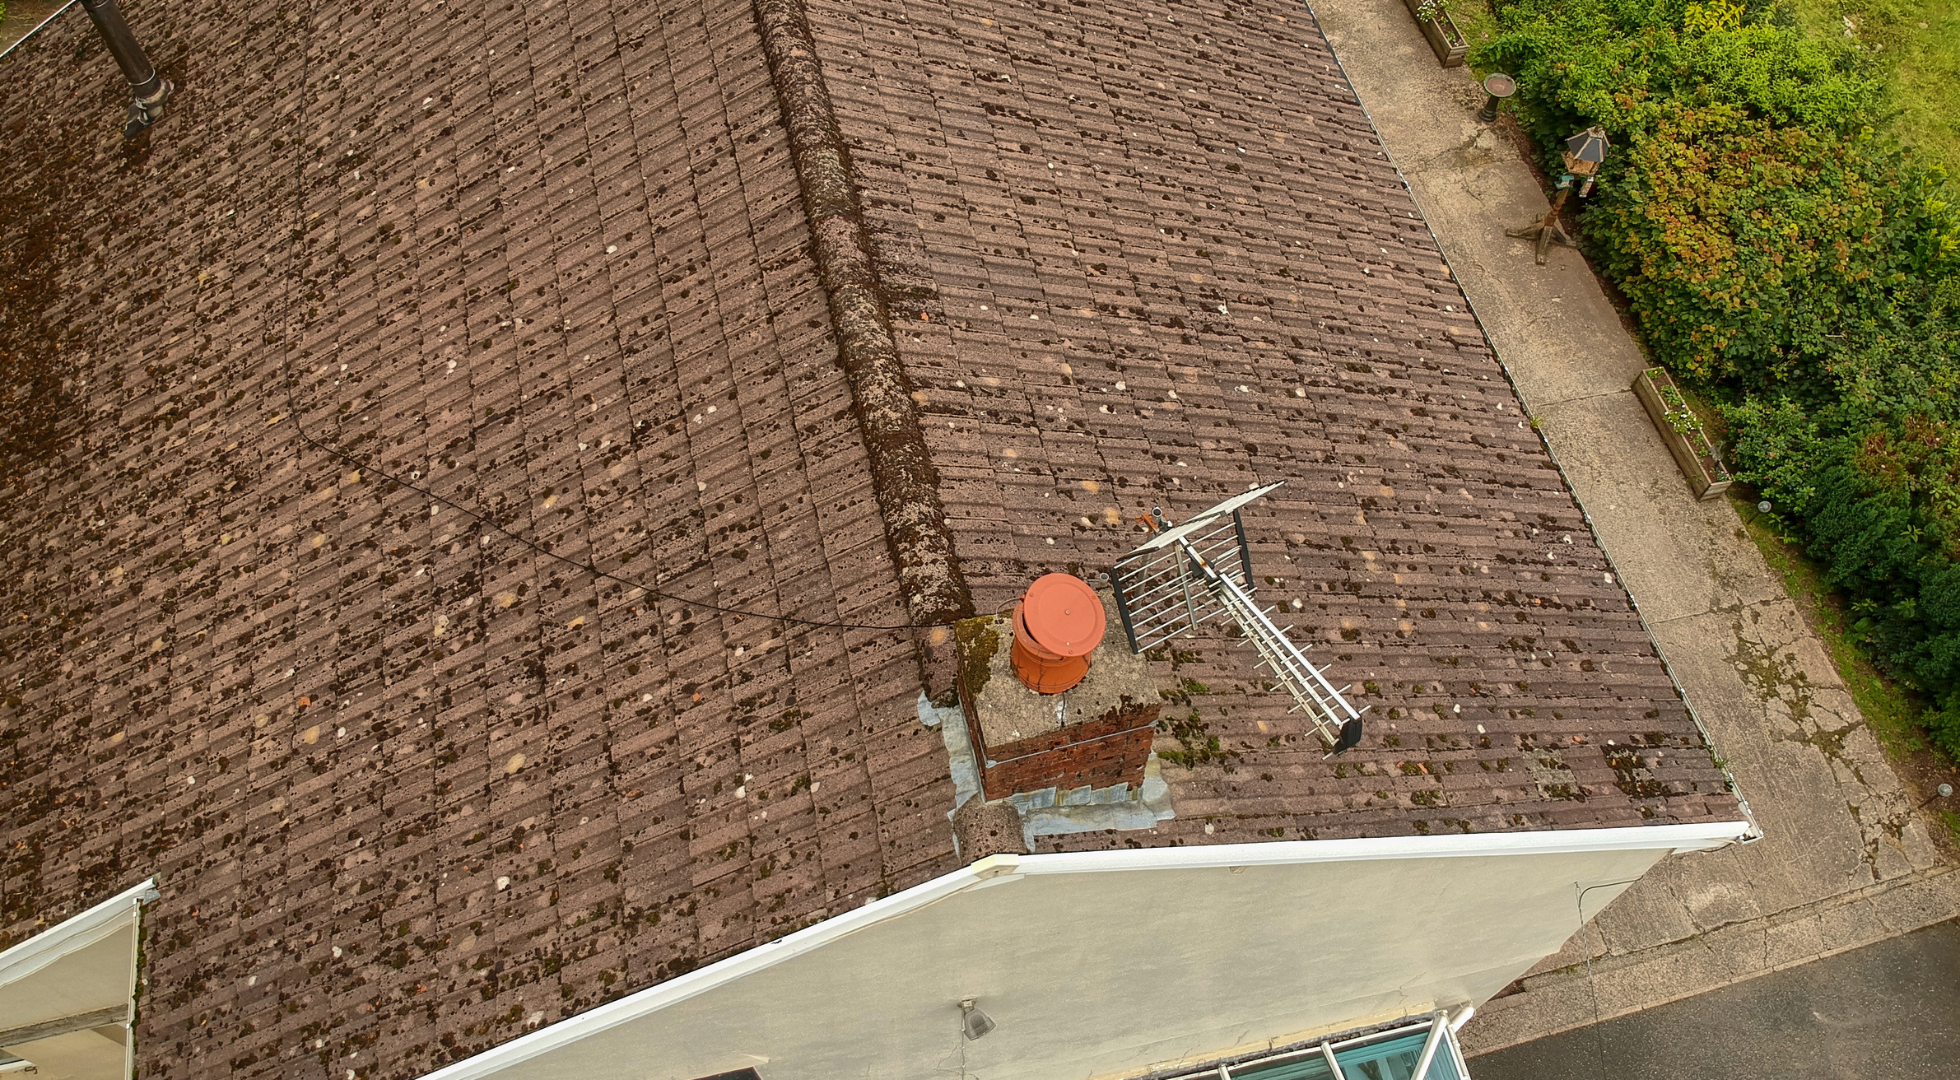 Benefits of using drones for rooftop inspection.